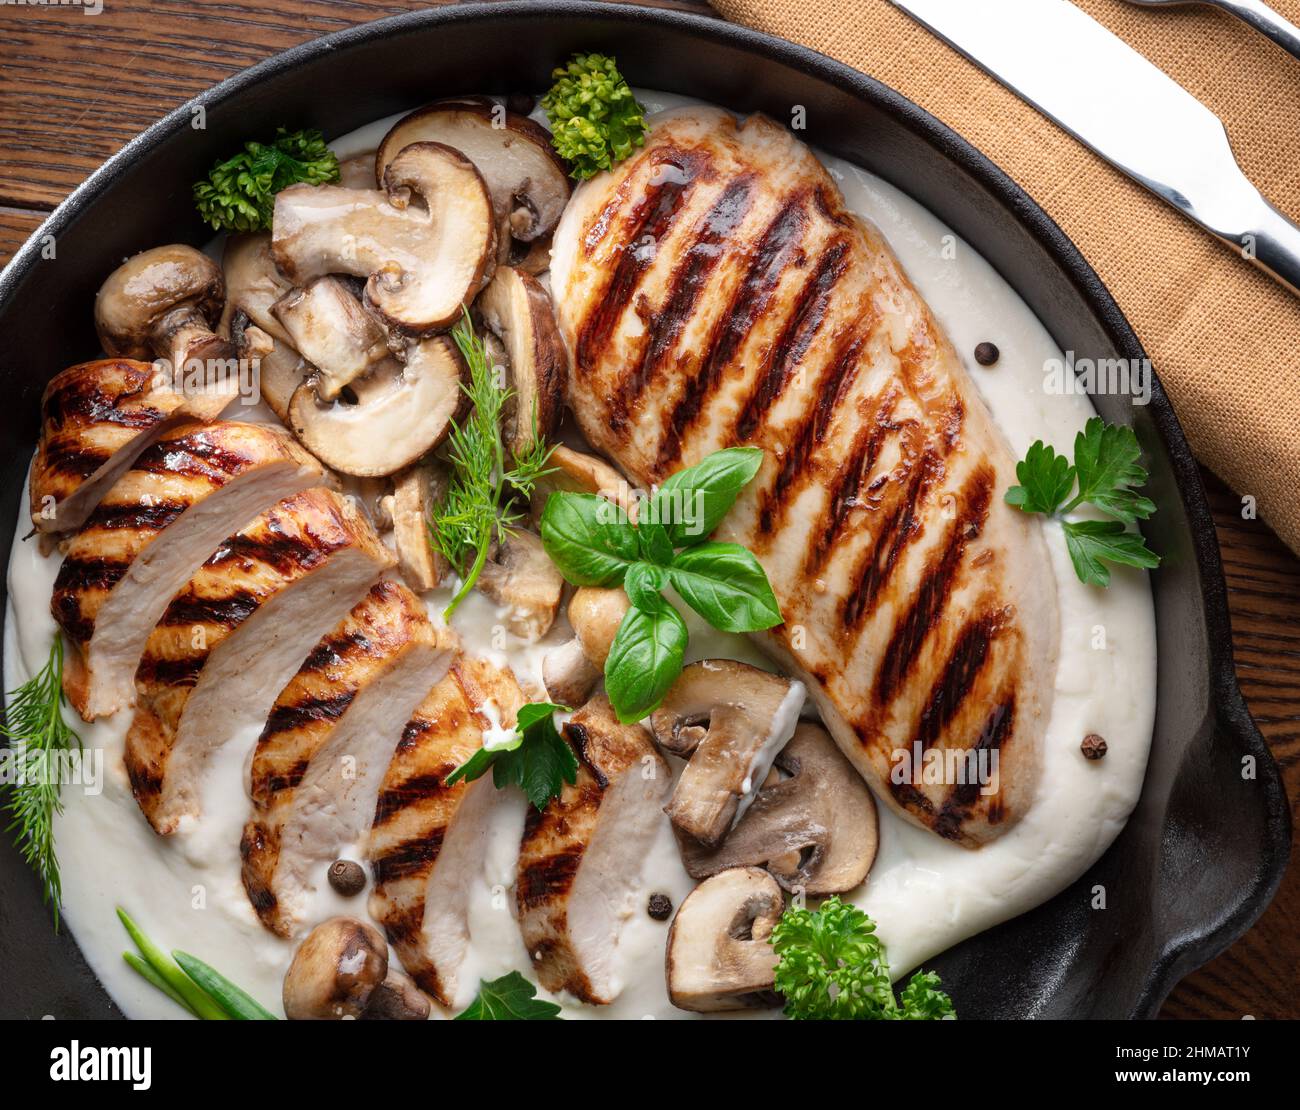 Roasted chicken fillet and mushrooms with herb in the frying pan on the wooden table close-up. Stock Photo